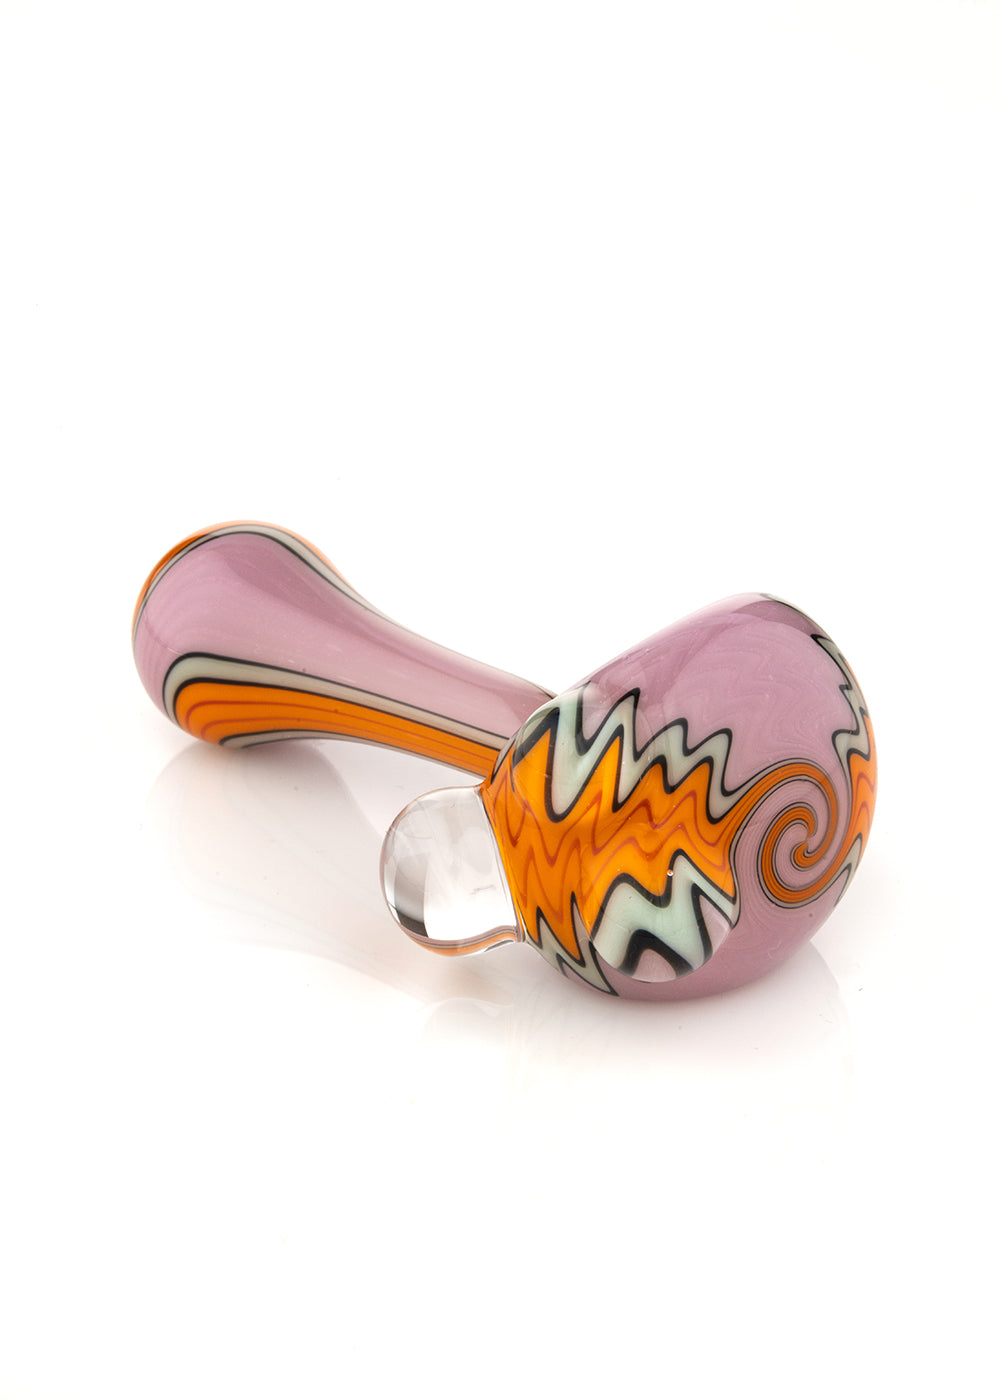 Orange and Pink Line Work Spoon by Sand